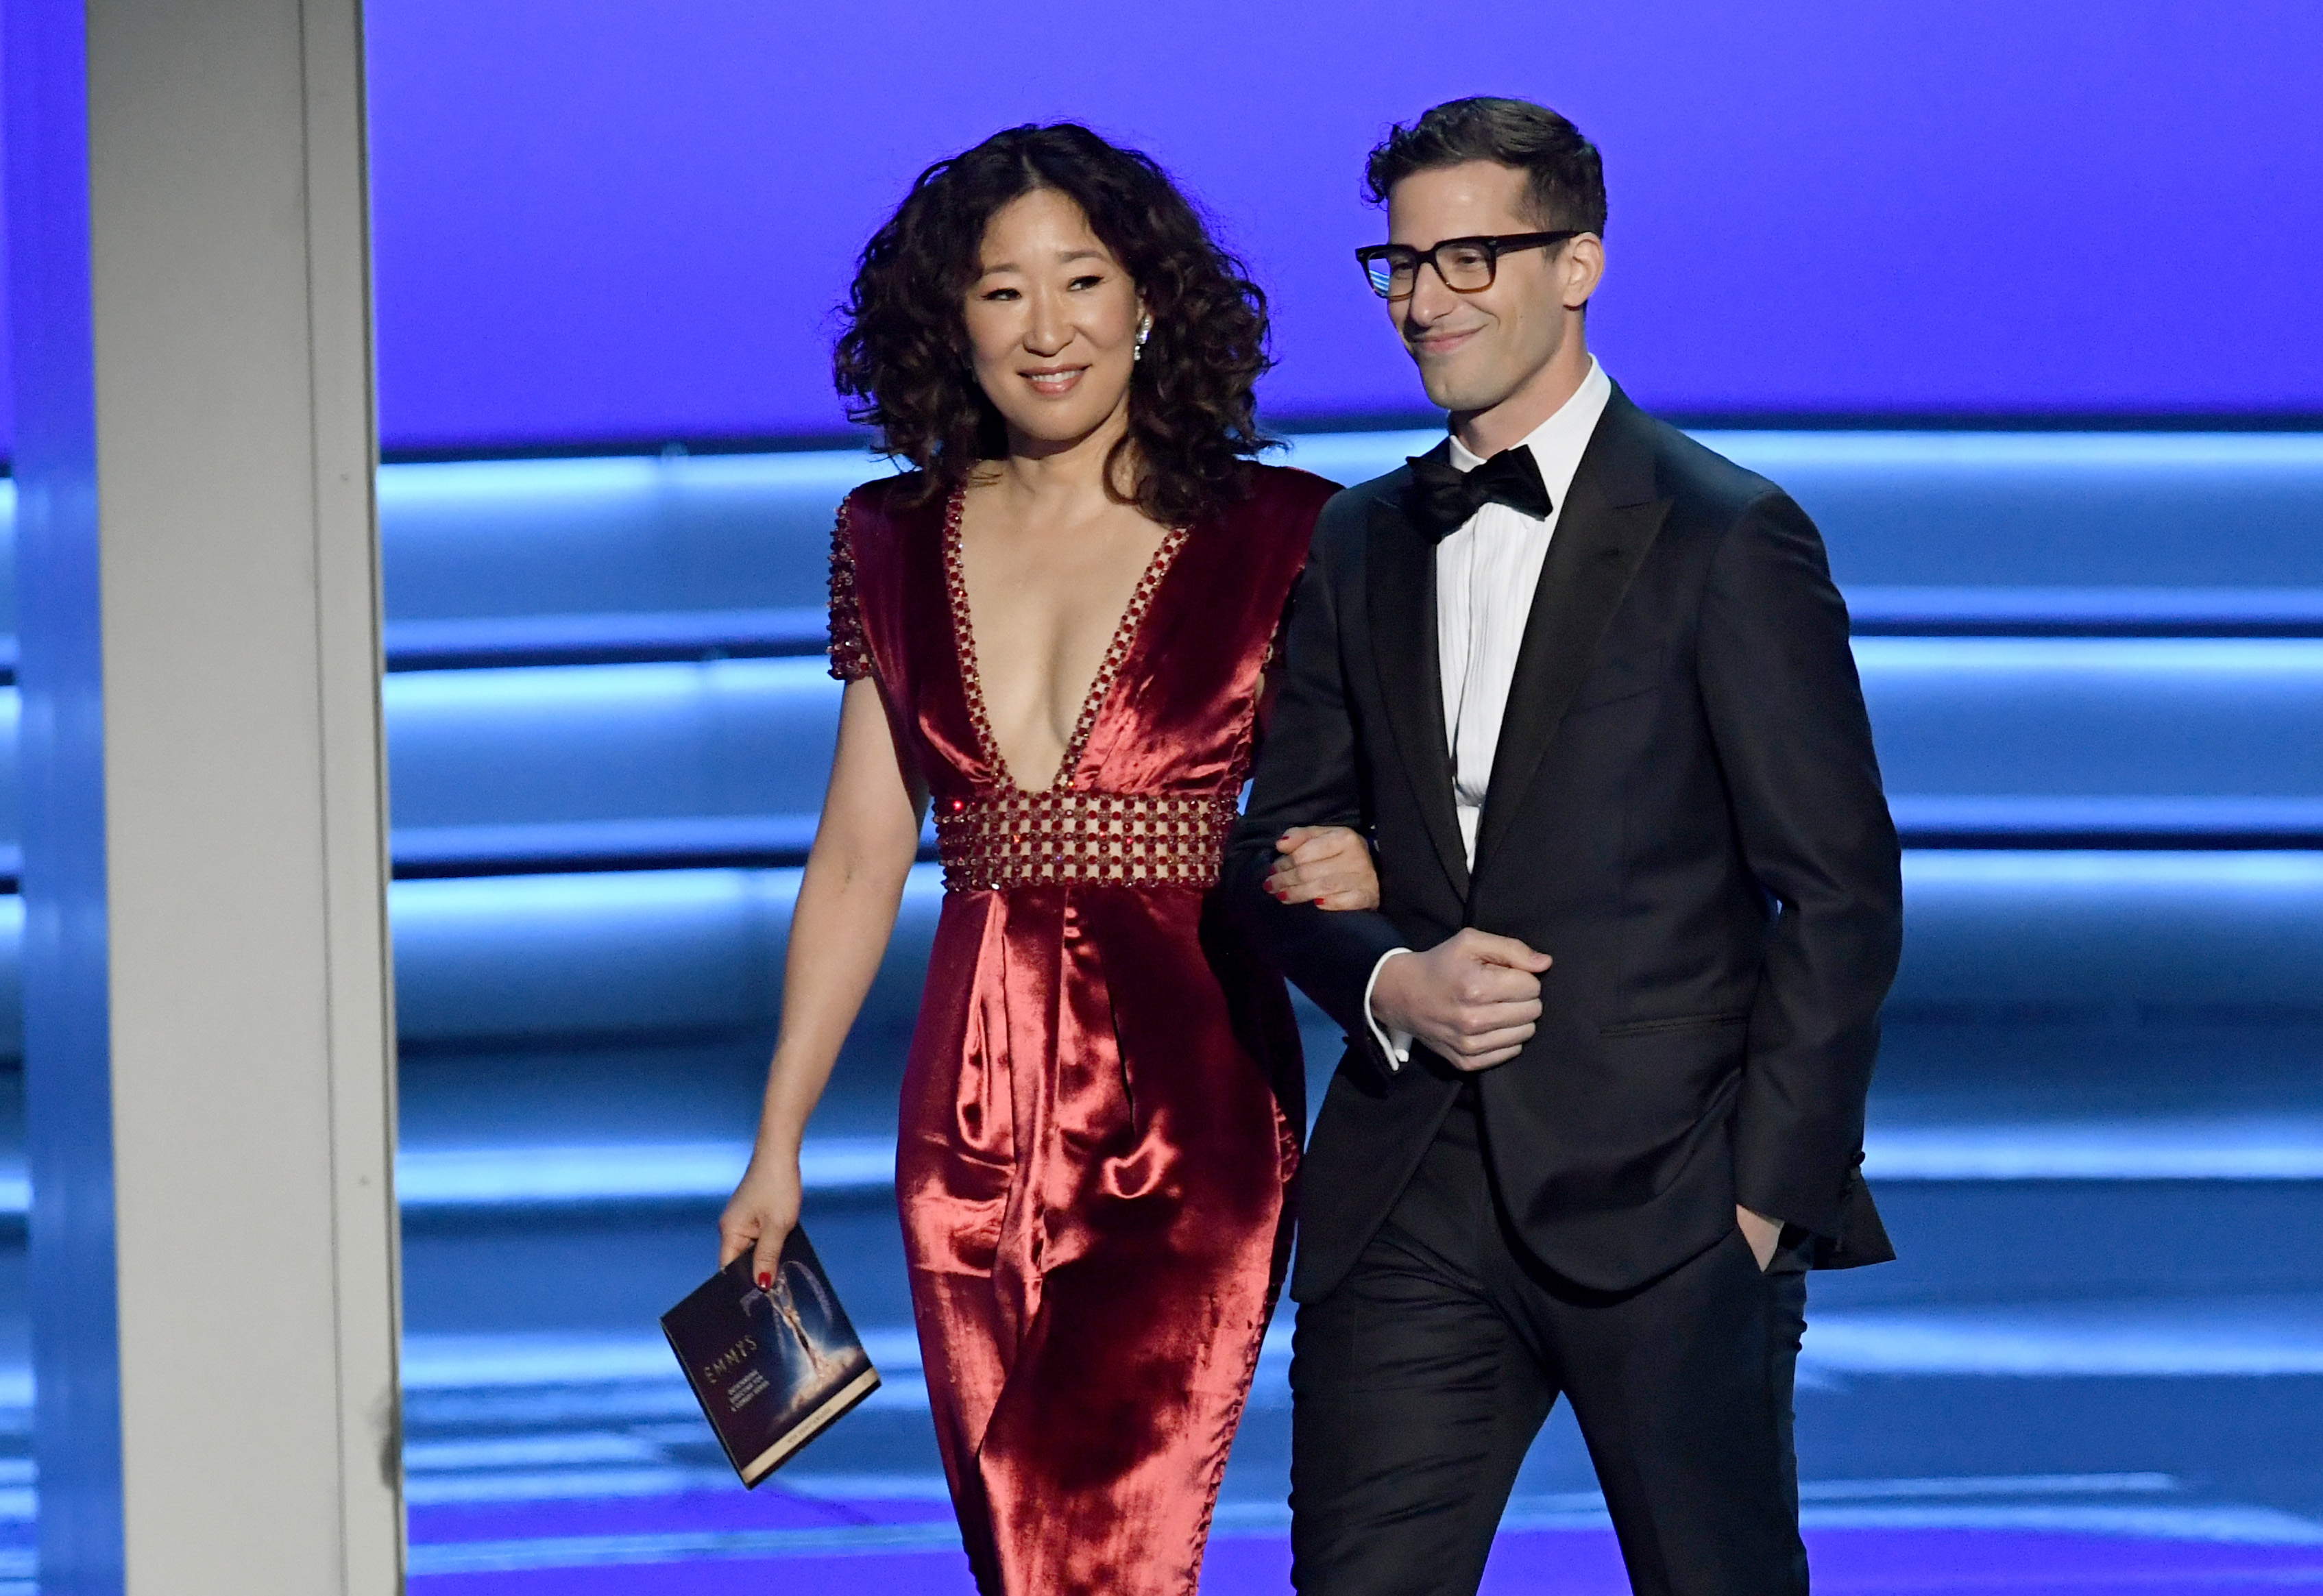 Sandra Oh (L) and Andy Samberg walk onstage during the 70th Emmy Awards at Microsoft Theater on September 17, 2018 in Los Angeles, California. (Kevin Winter—Getty Images)